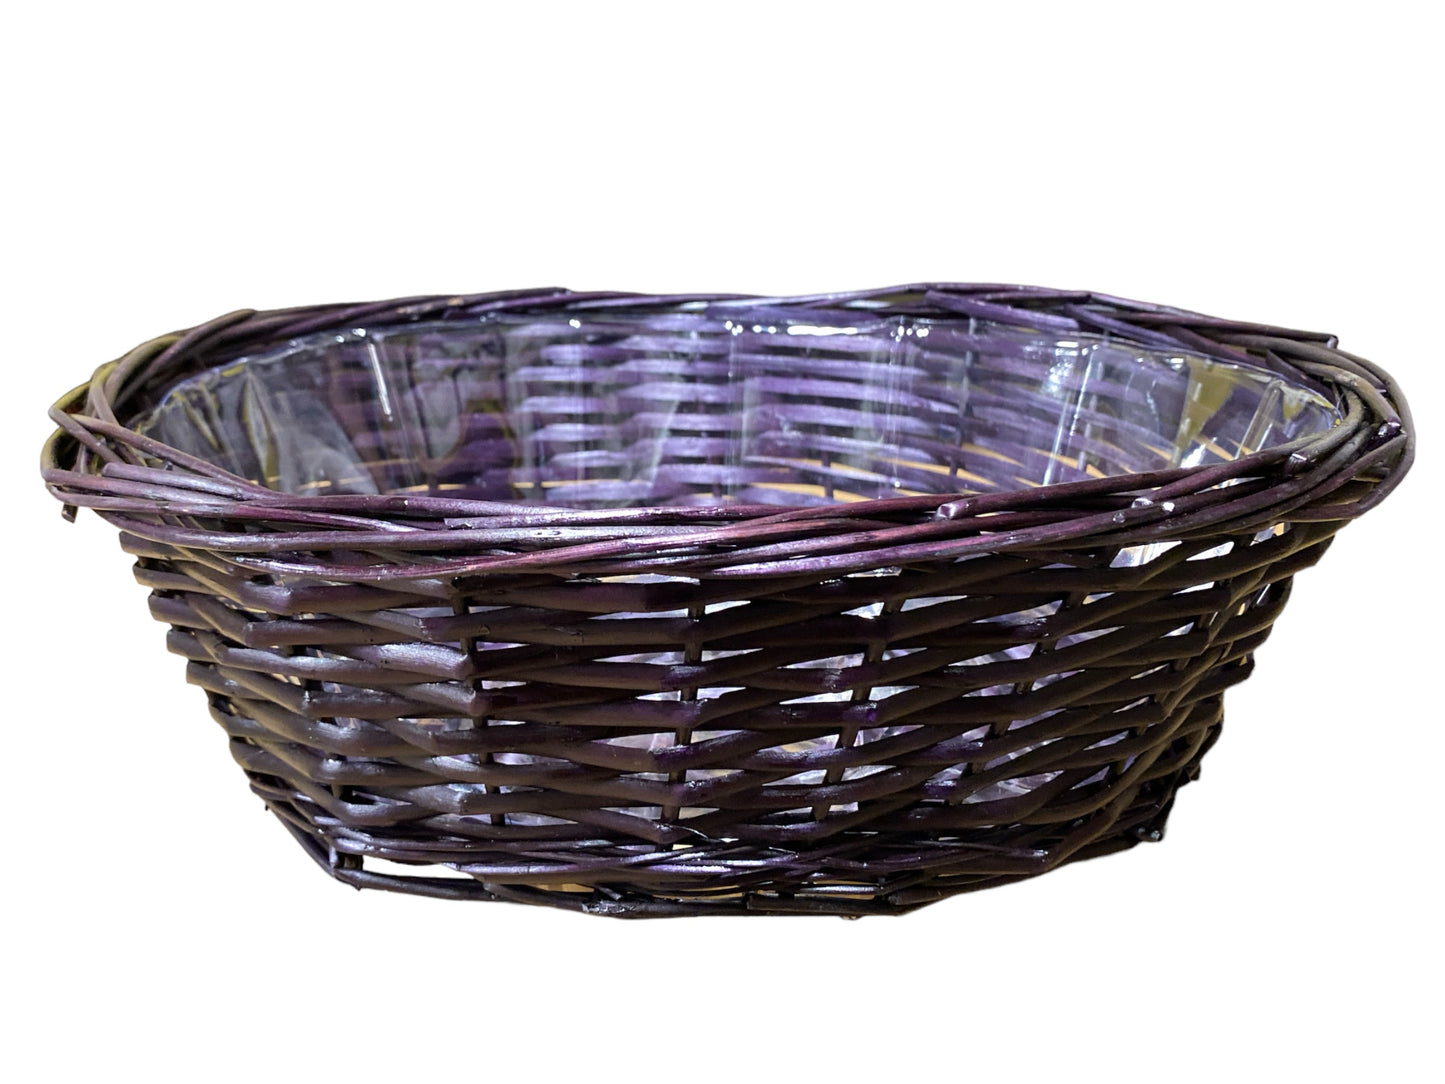 WILLOW OVAL TRAY - WINE -  16 X 5 deep - Fits a 25x30 or 26x40 Basket bag